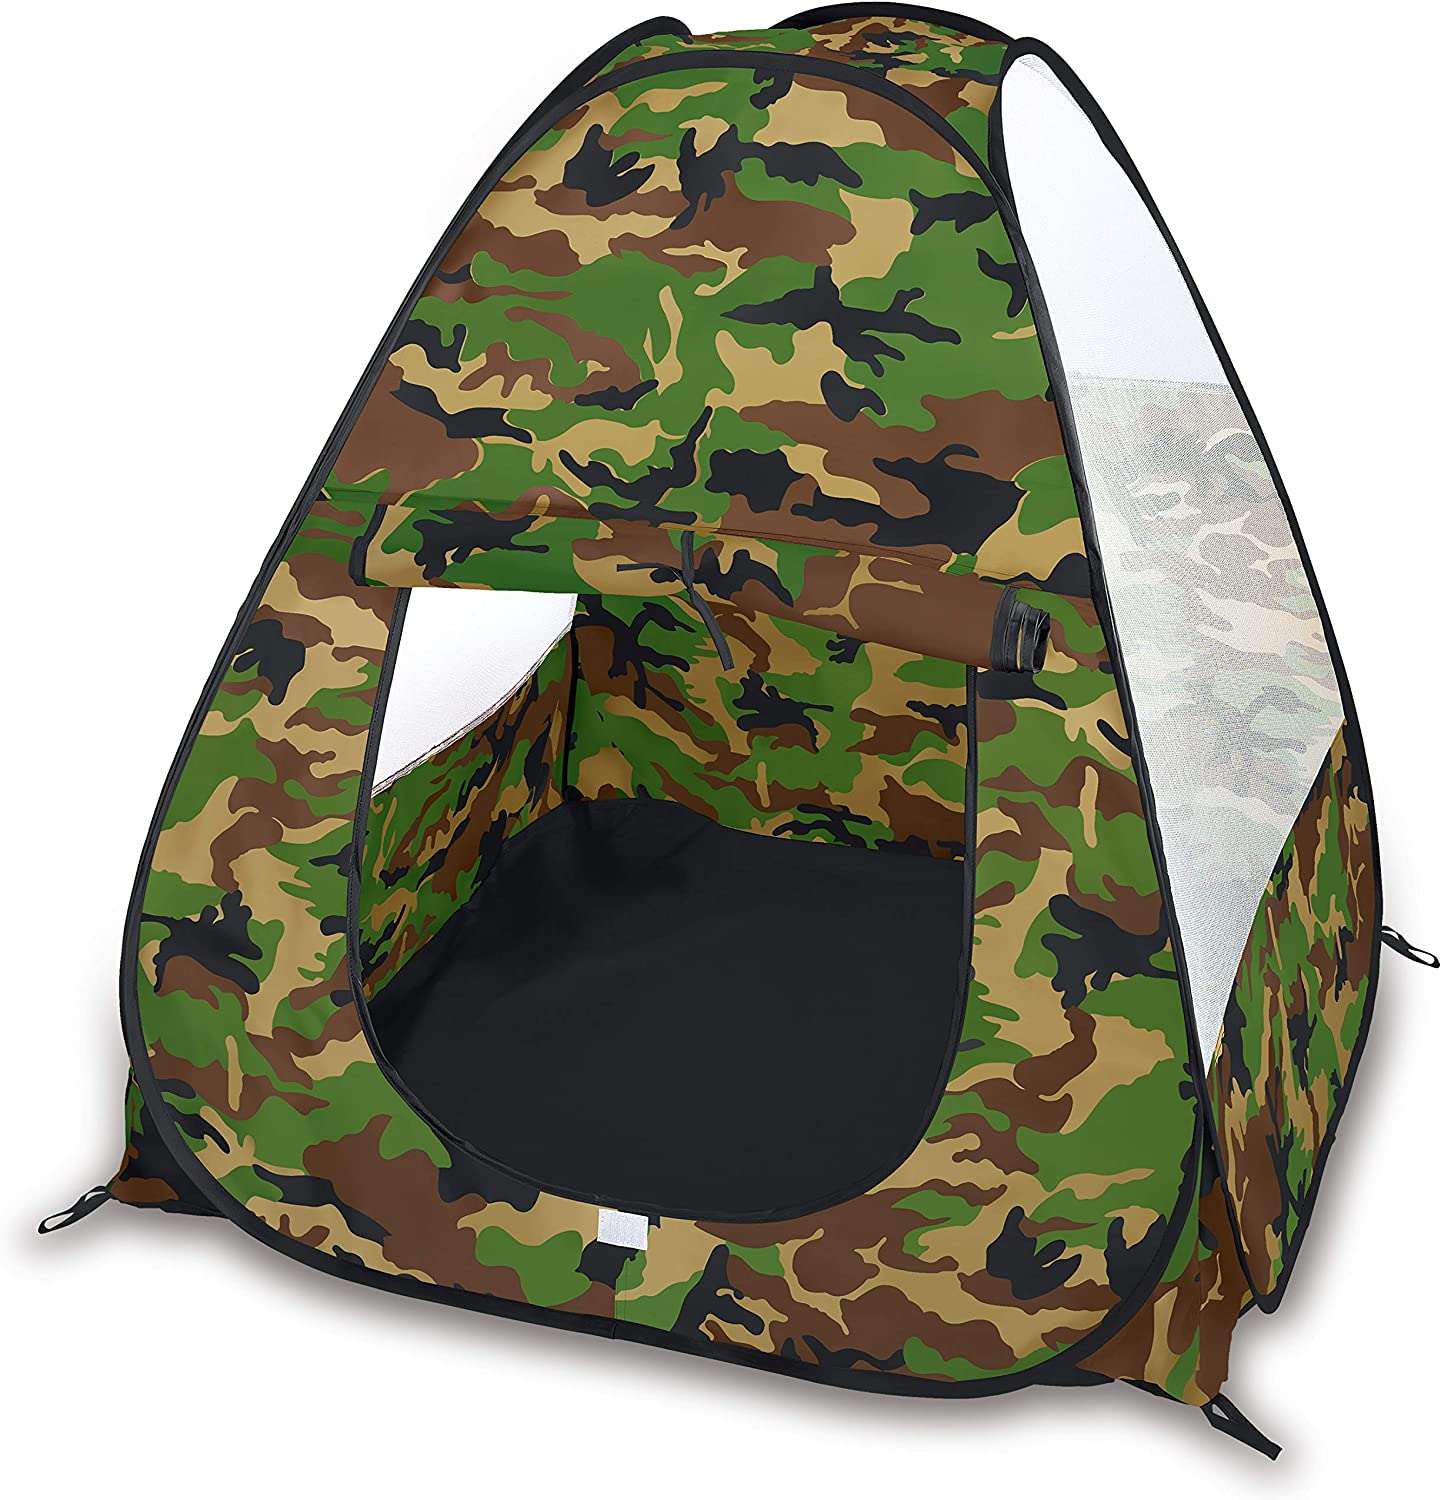 Camouflage Military Pop Up Play Tent – Collapsible Indoor/Outdoor Army Playhouse for Kids